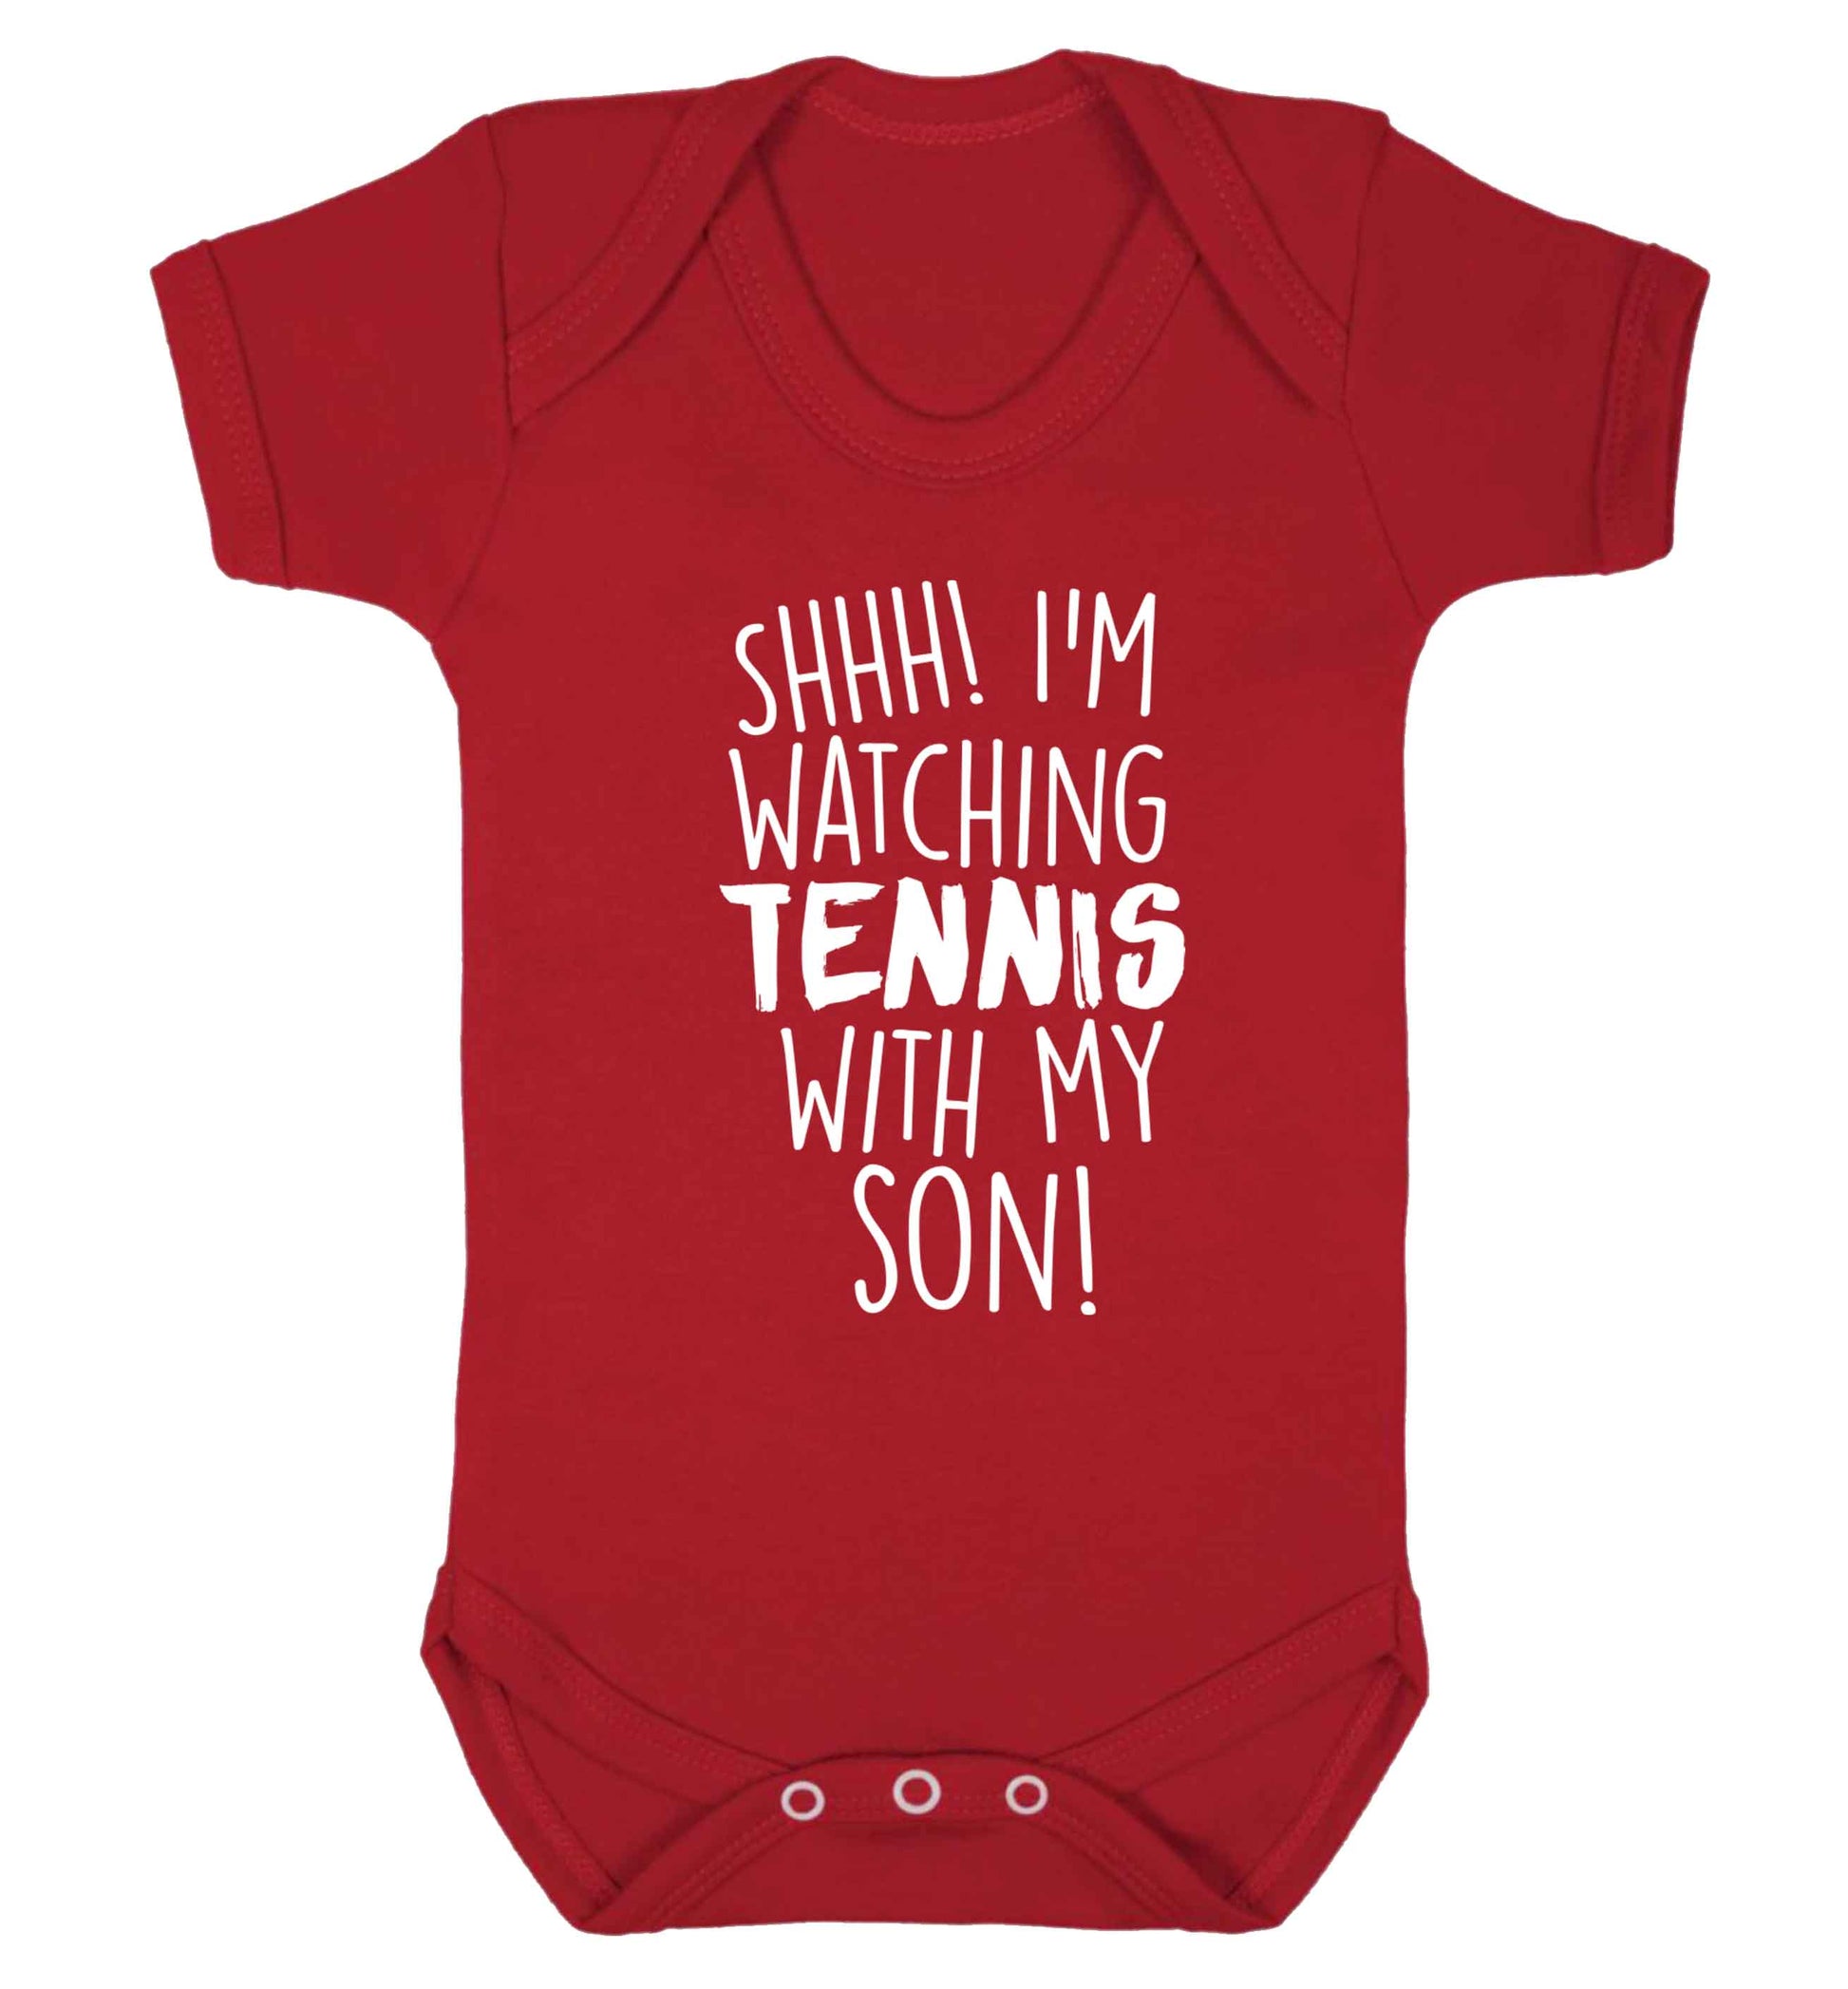 Shh! I'm watching tennis with my son! Baby Vest red 18-24 months